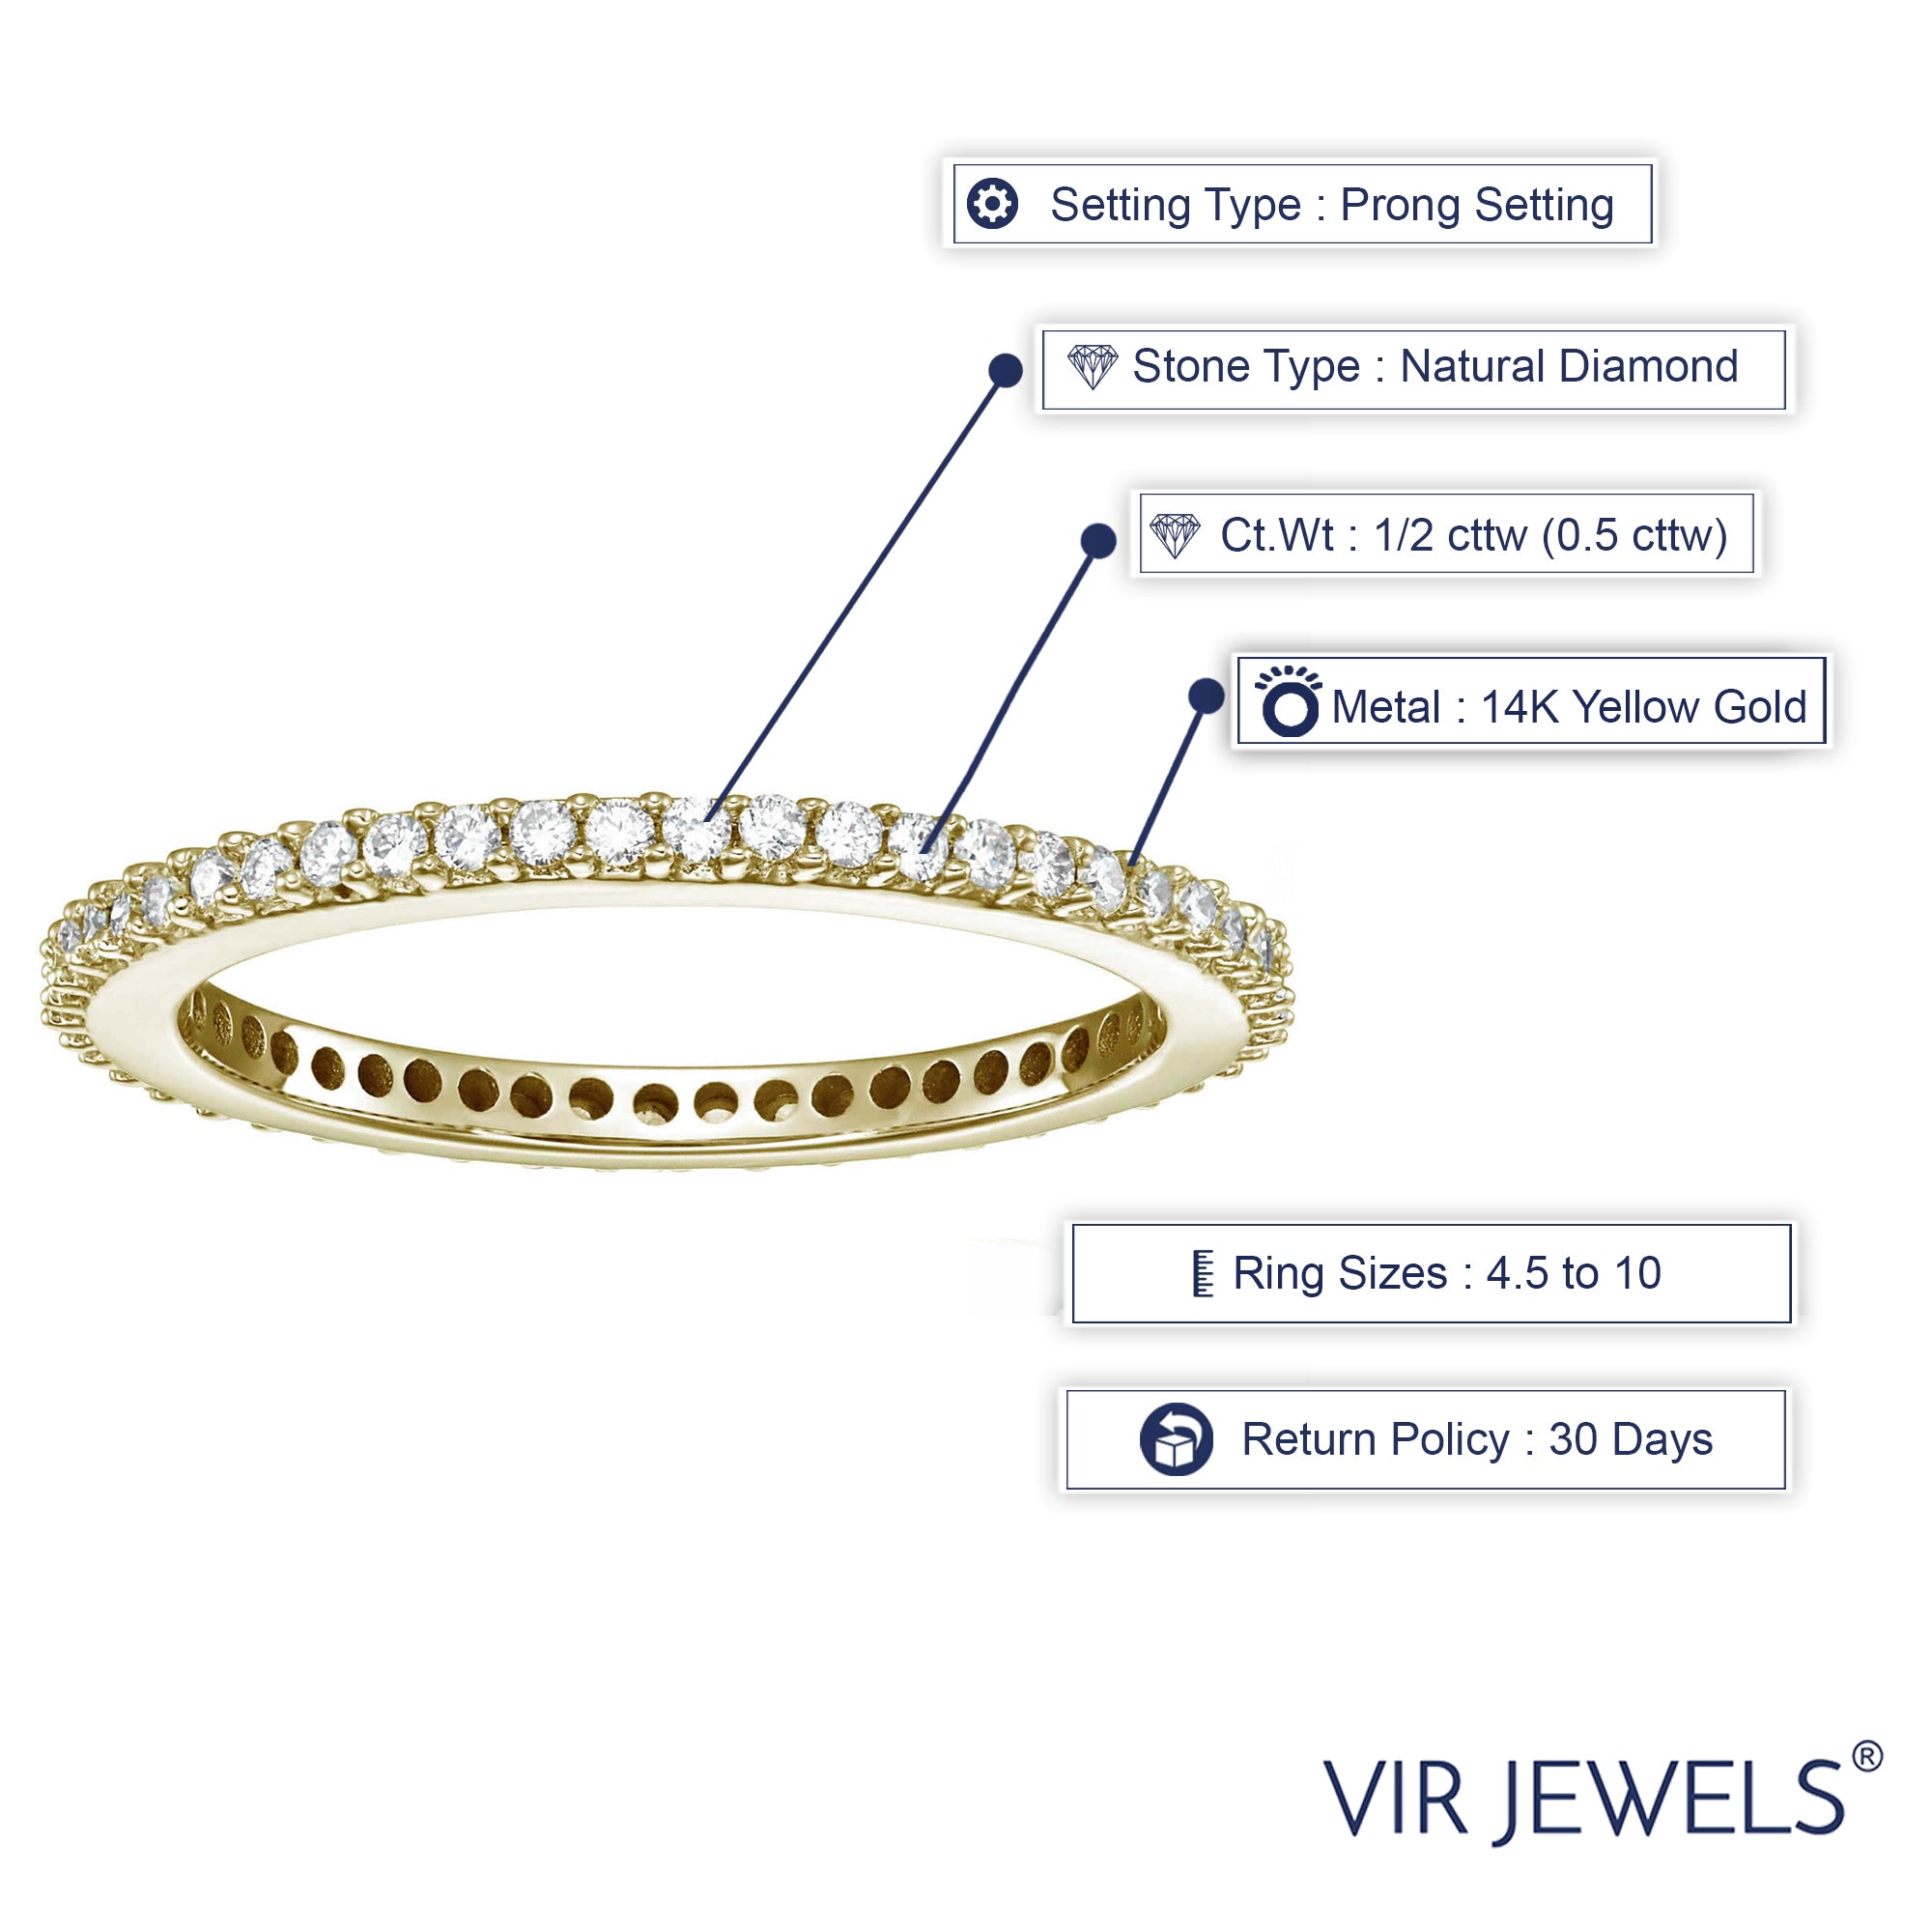 1/2 cttw Diamond Eternity Ring for Women, Wedding Band in 14K Yellow Gold Prong Set, Size 4.5-10